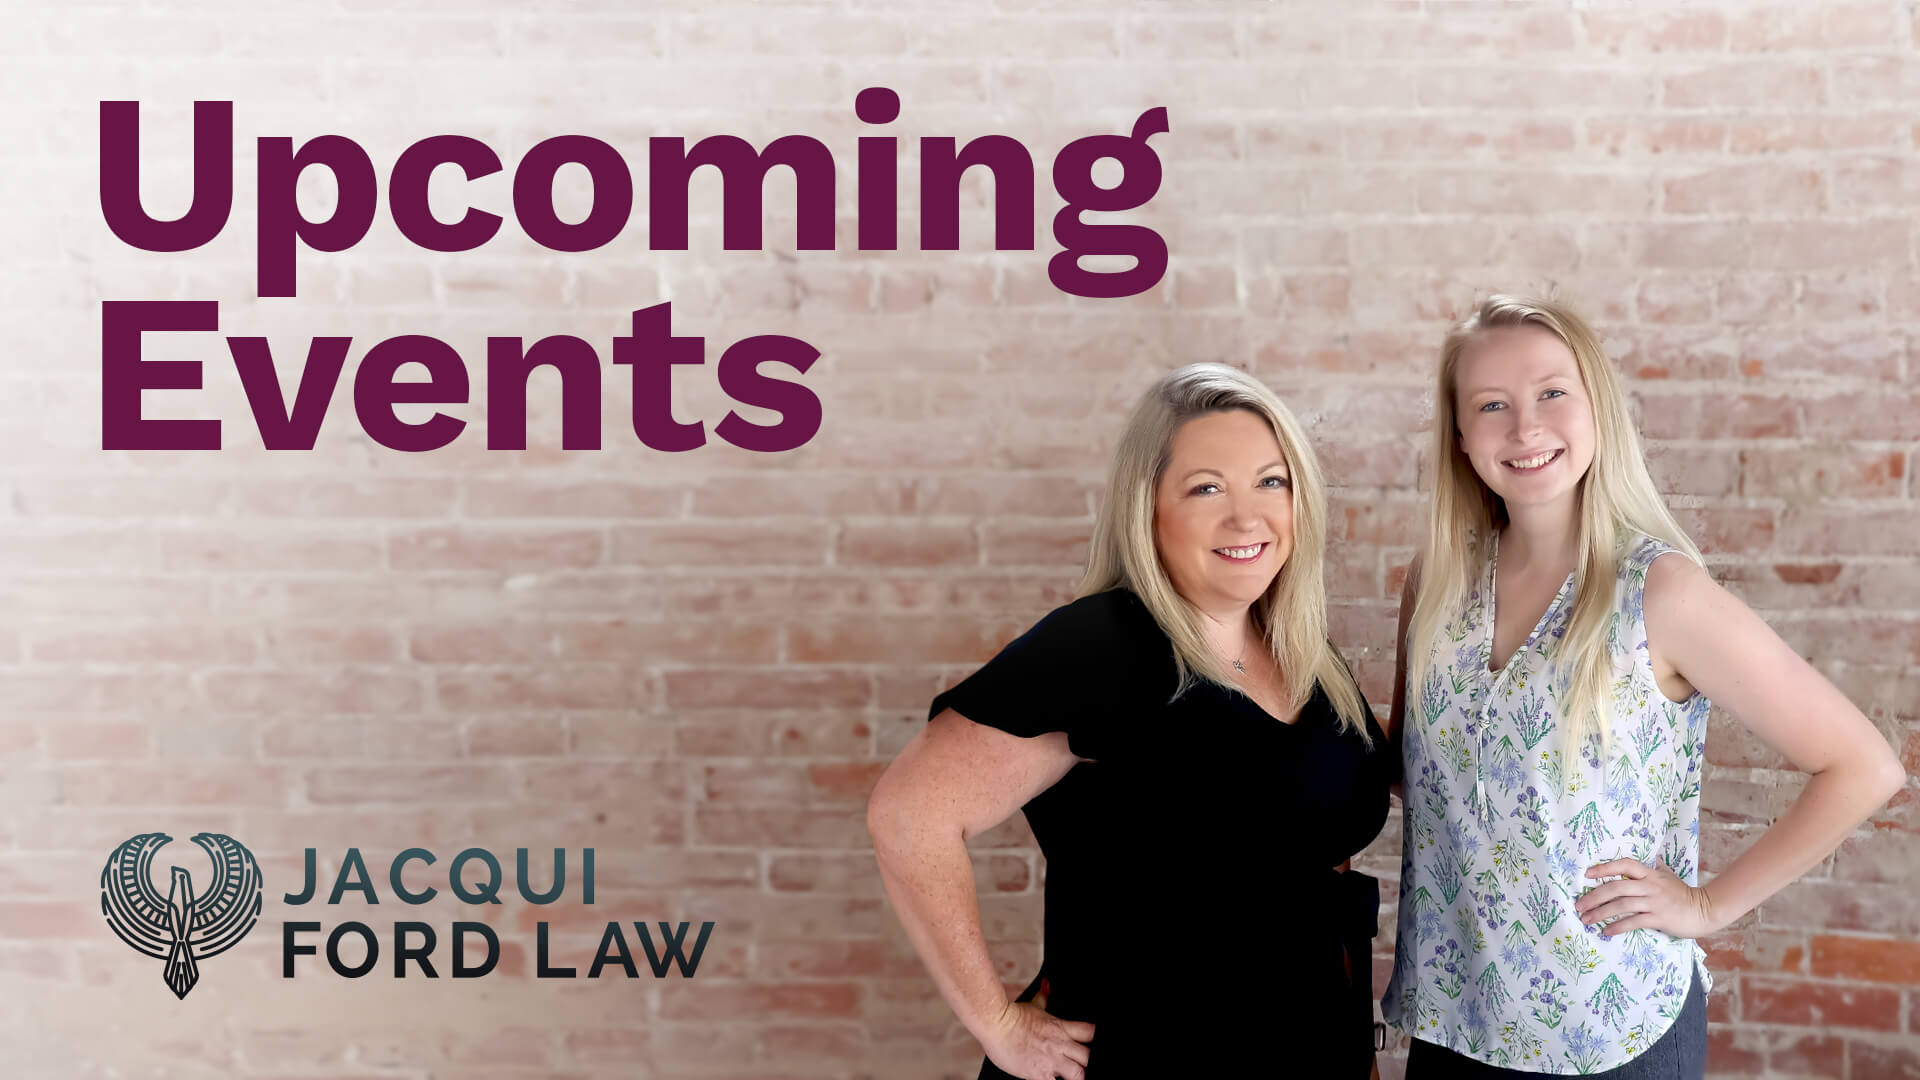 Jacqui-Ford-Law-Criminal-Defense-Lawyer-Oklahoma-City-Feat-img-Upcoming-Events